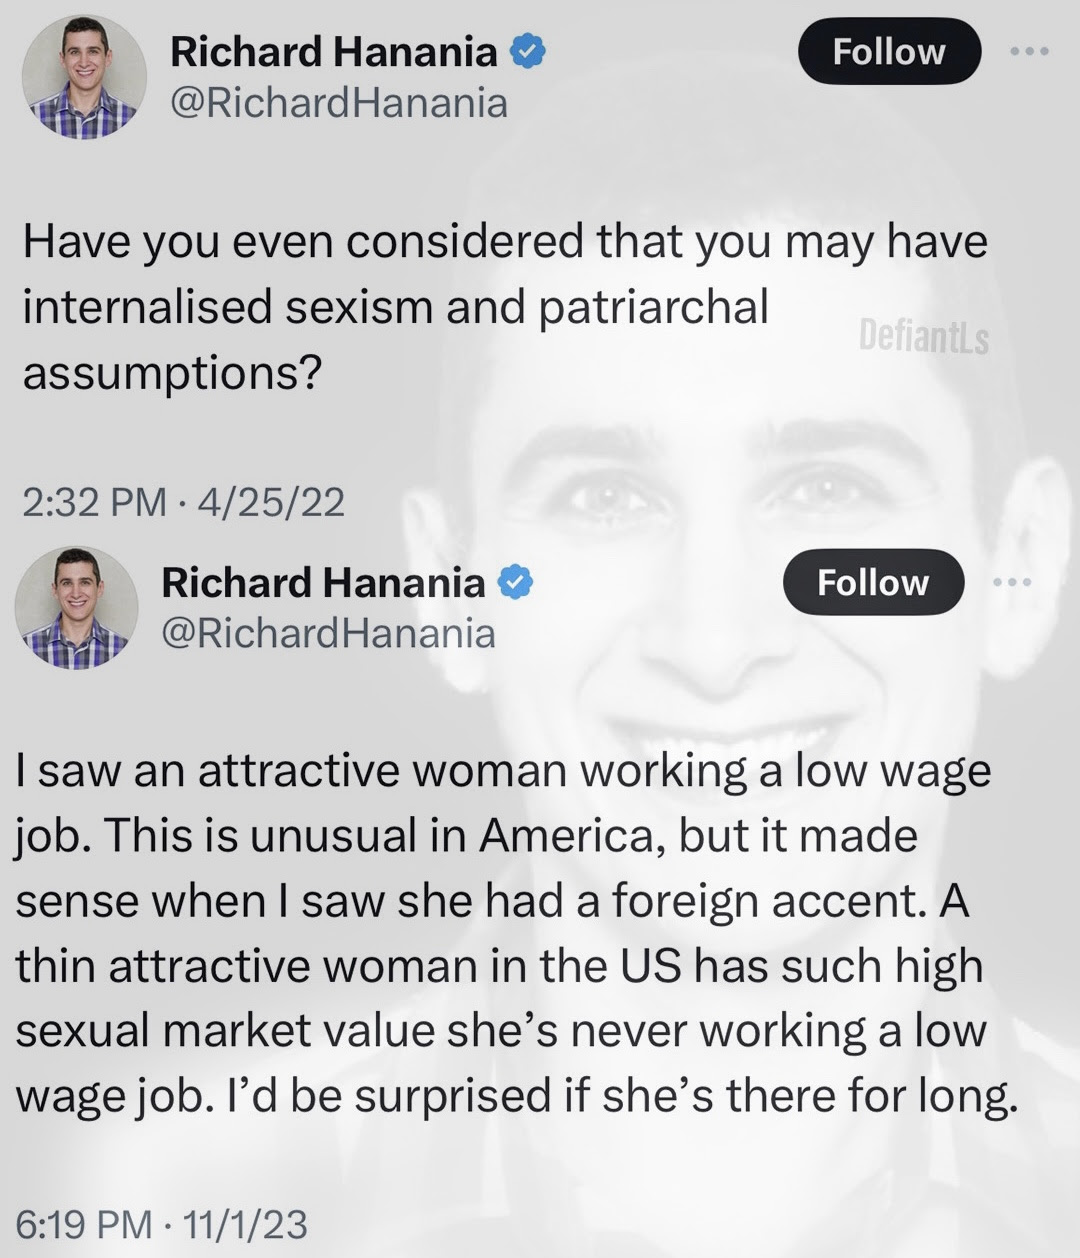 Hypocrite Richard Hanania. He first condemns internalized sexism then a year later expresses sexism.